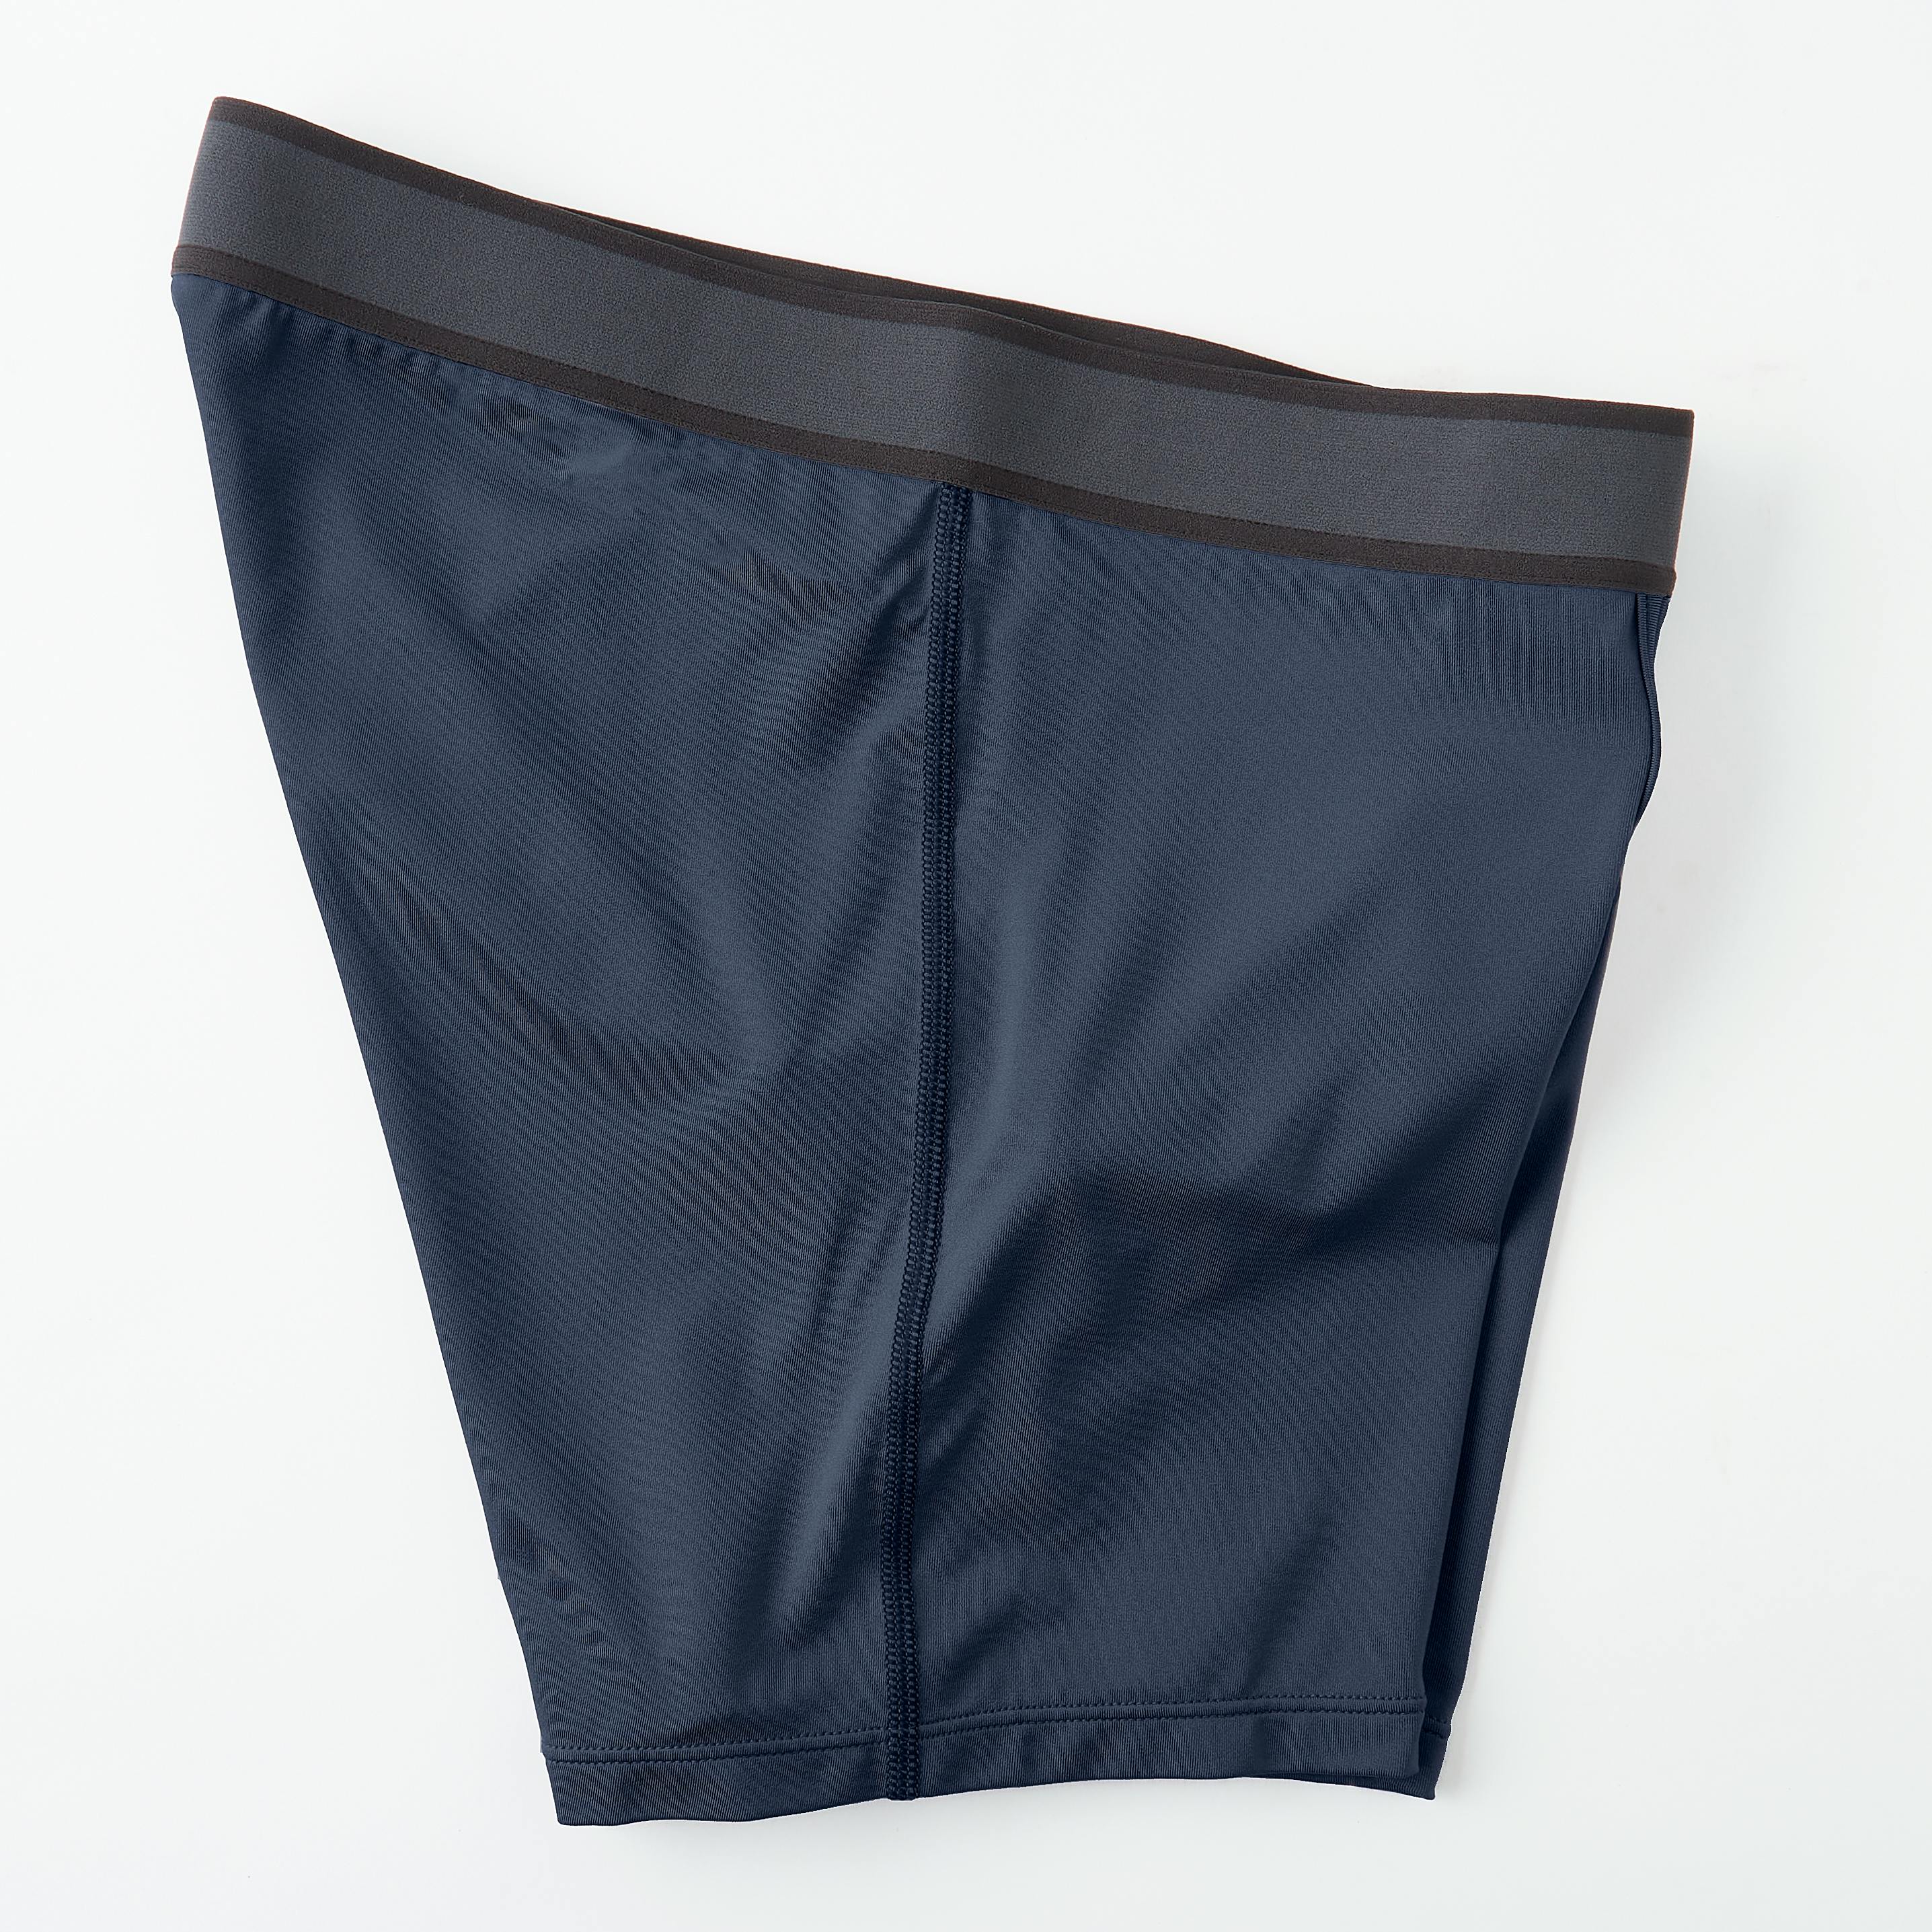 Proof Performance Boxer Brief